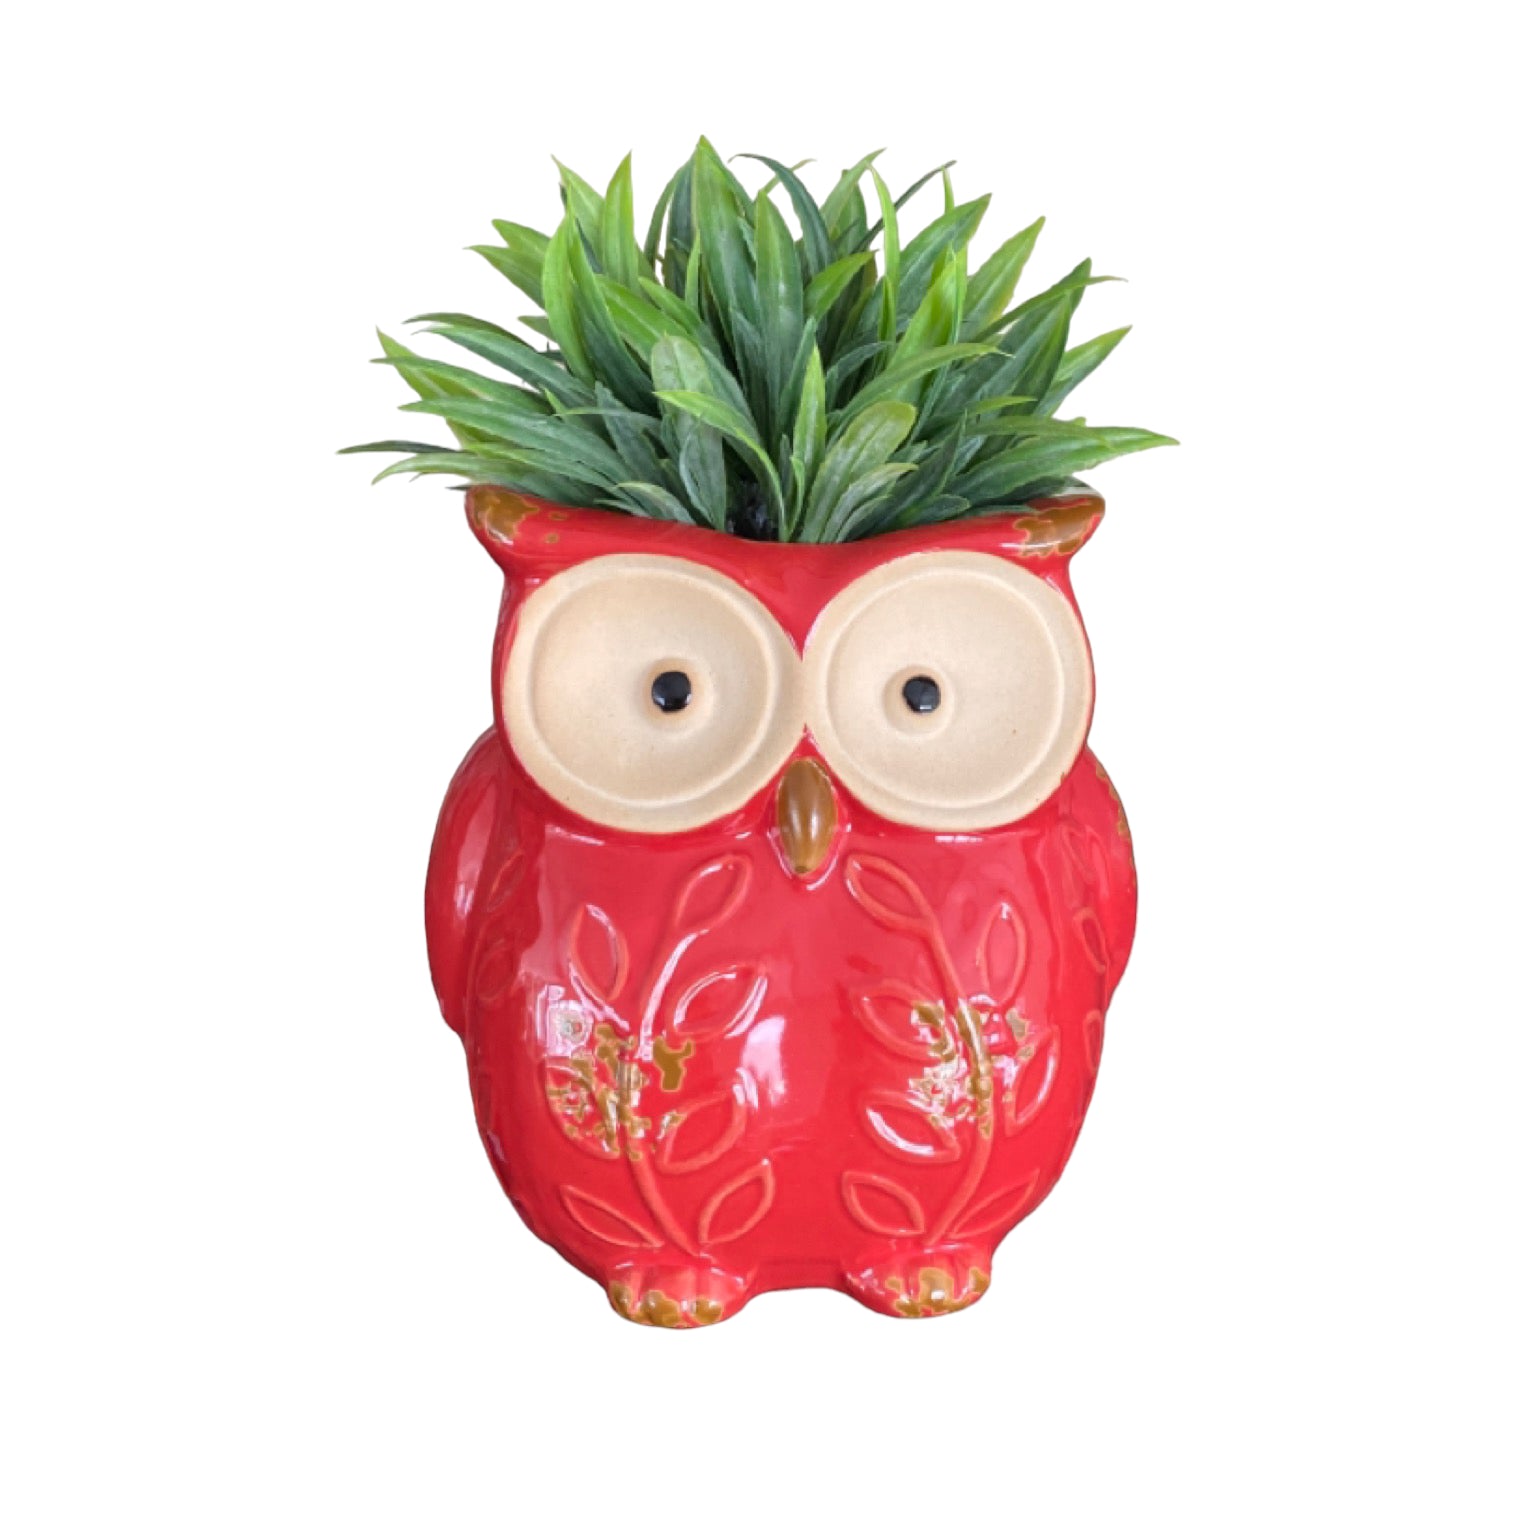 Plant Pot Planter Owl Red Bird - The Renmy Store Homewares & Gifts 